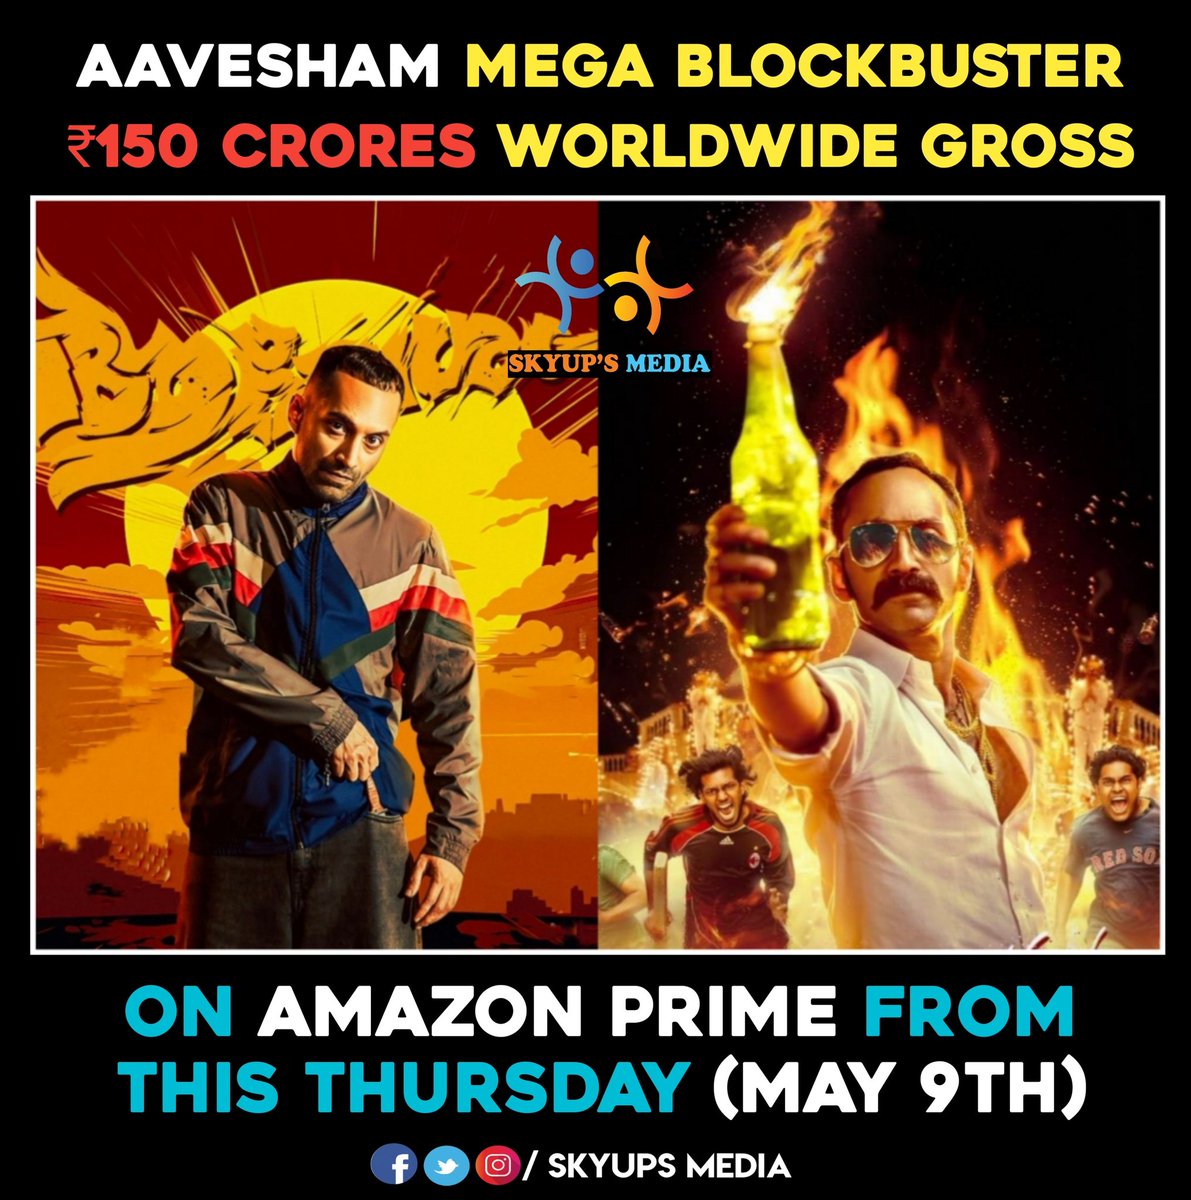 BLOCKBUSTER #Aavesham ❤️‍🔥 On #AmazonPrime from May 9th..